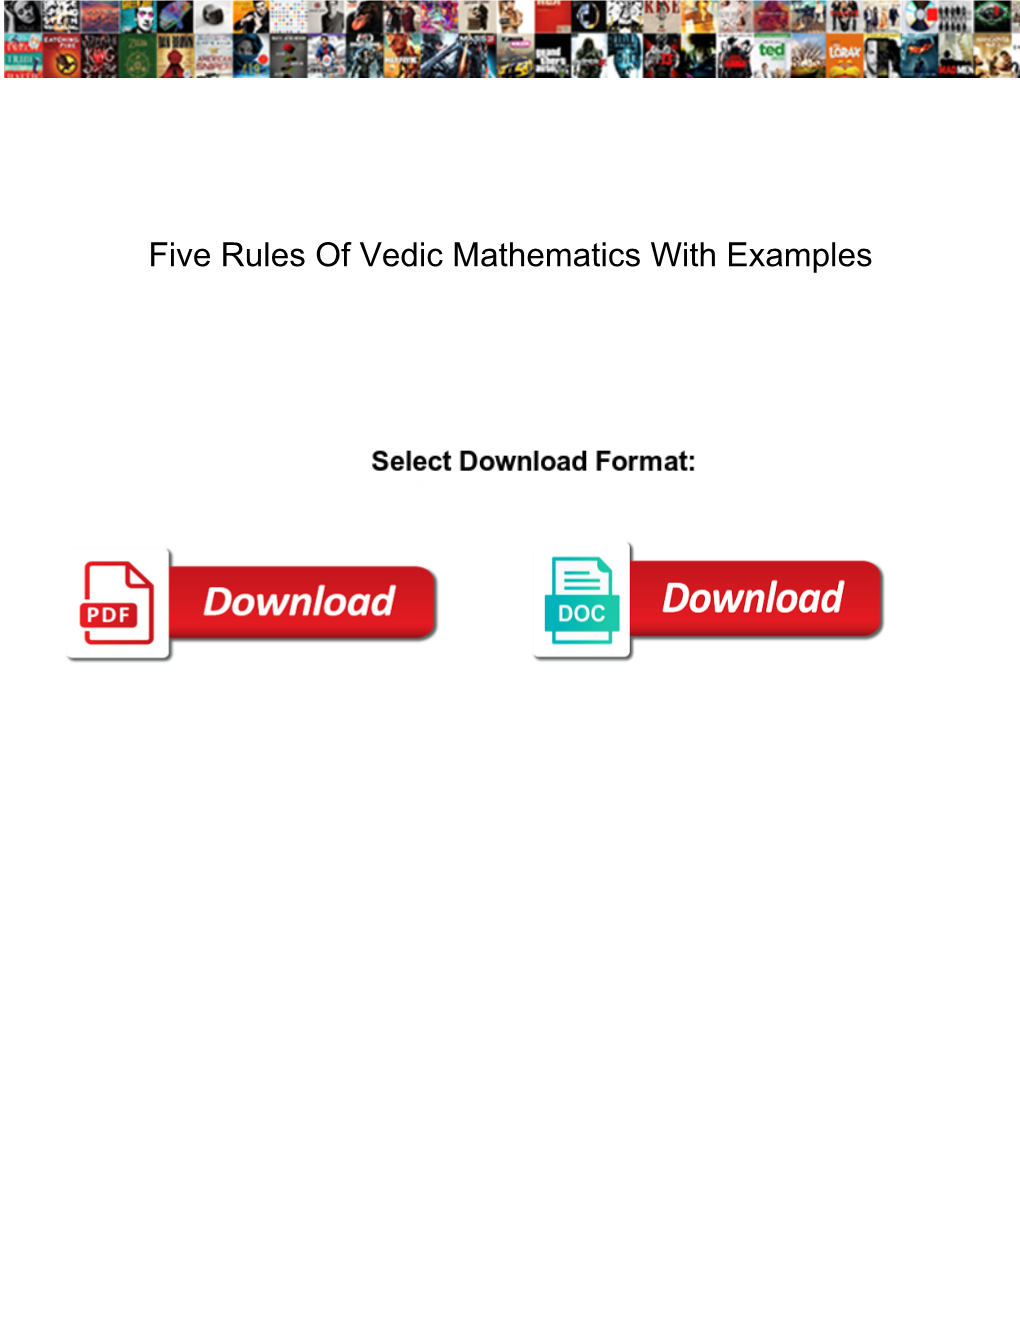 Five Rules of Vedic Mathematics with Examples